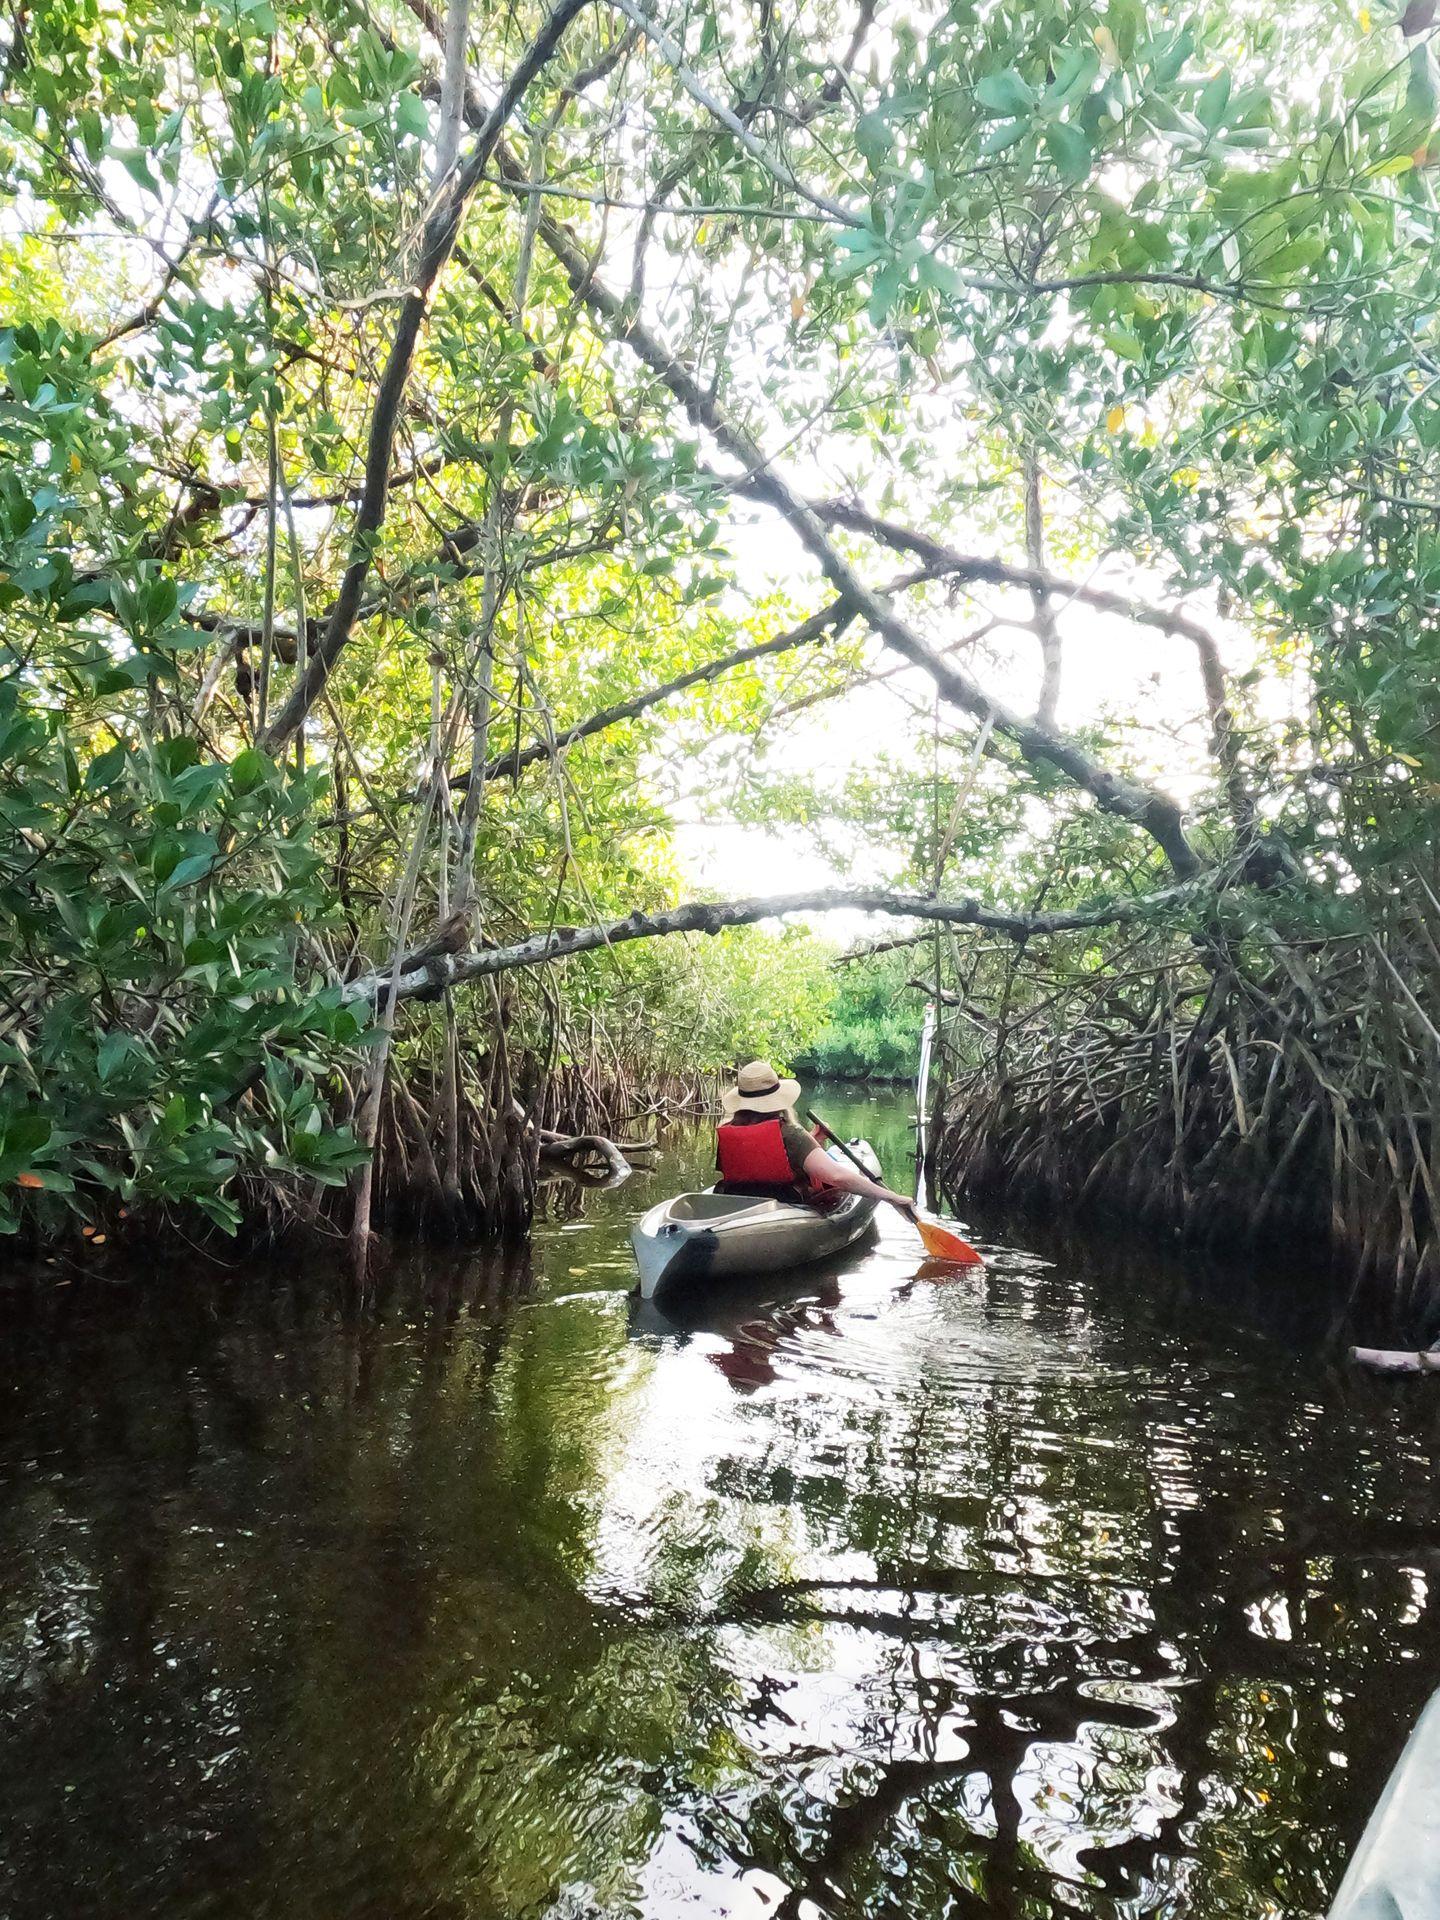 Lydia kayaking away through a mangrove tunnel. She wear a red life vest and a tree hangs low above her.